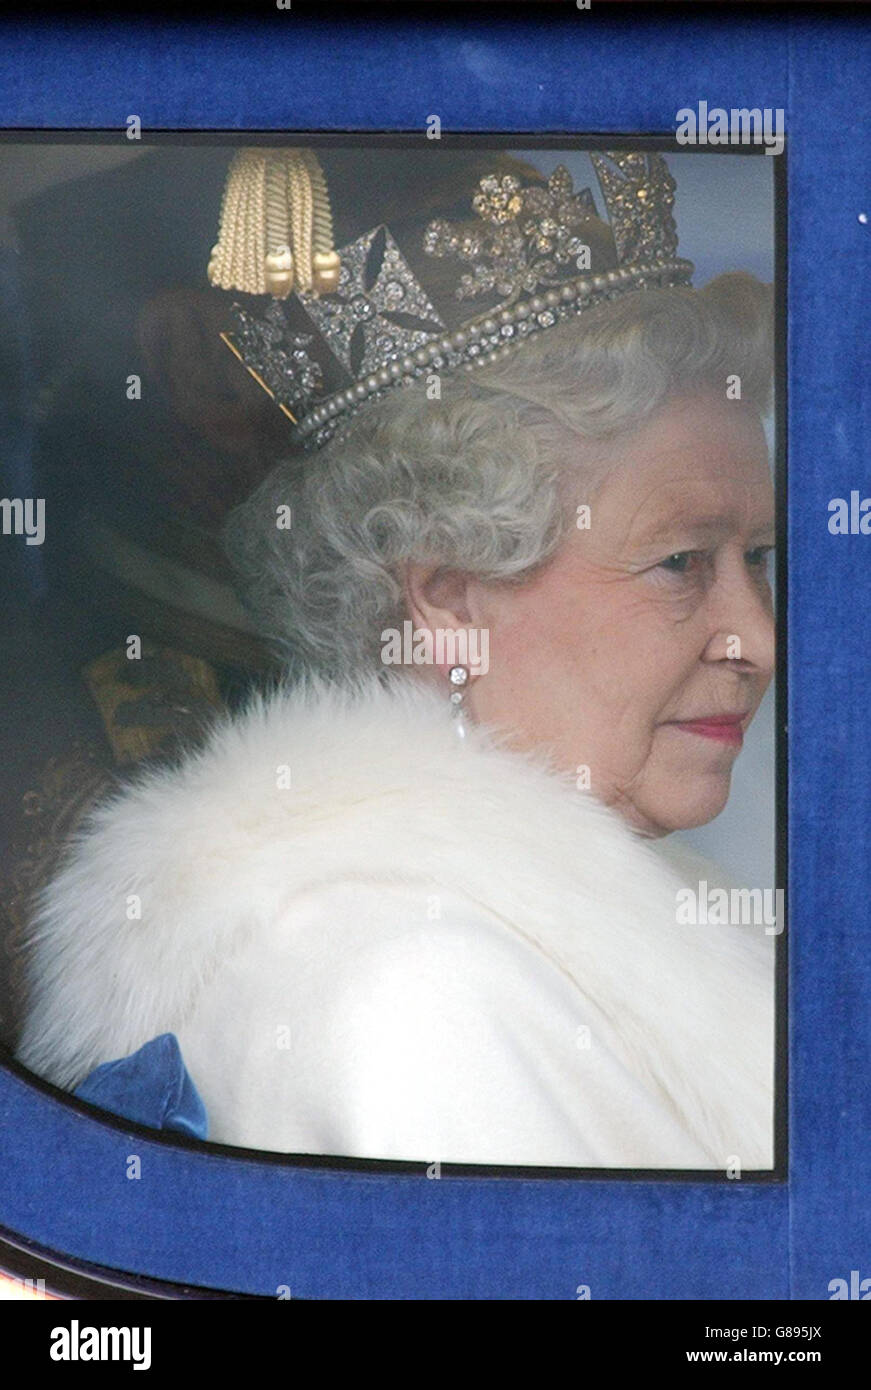 Britain's Queen Elizabeth II travels to the House of Lords in a horse-drawn carriage from Buckingham Palace, London, for the State Opening of Parliament. The Queen's Speech will set out the government's legislative programme for the new parliamentary session following the Labour Party's return to power in the General Election earlier this month. Stock Photo